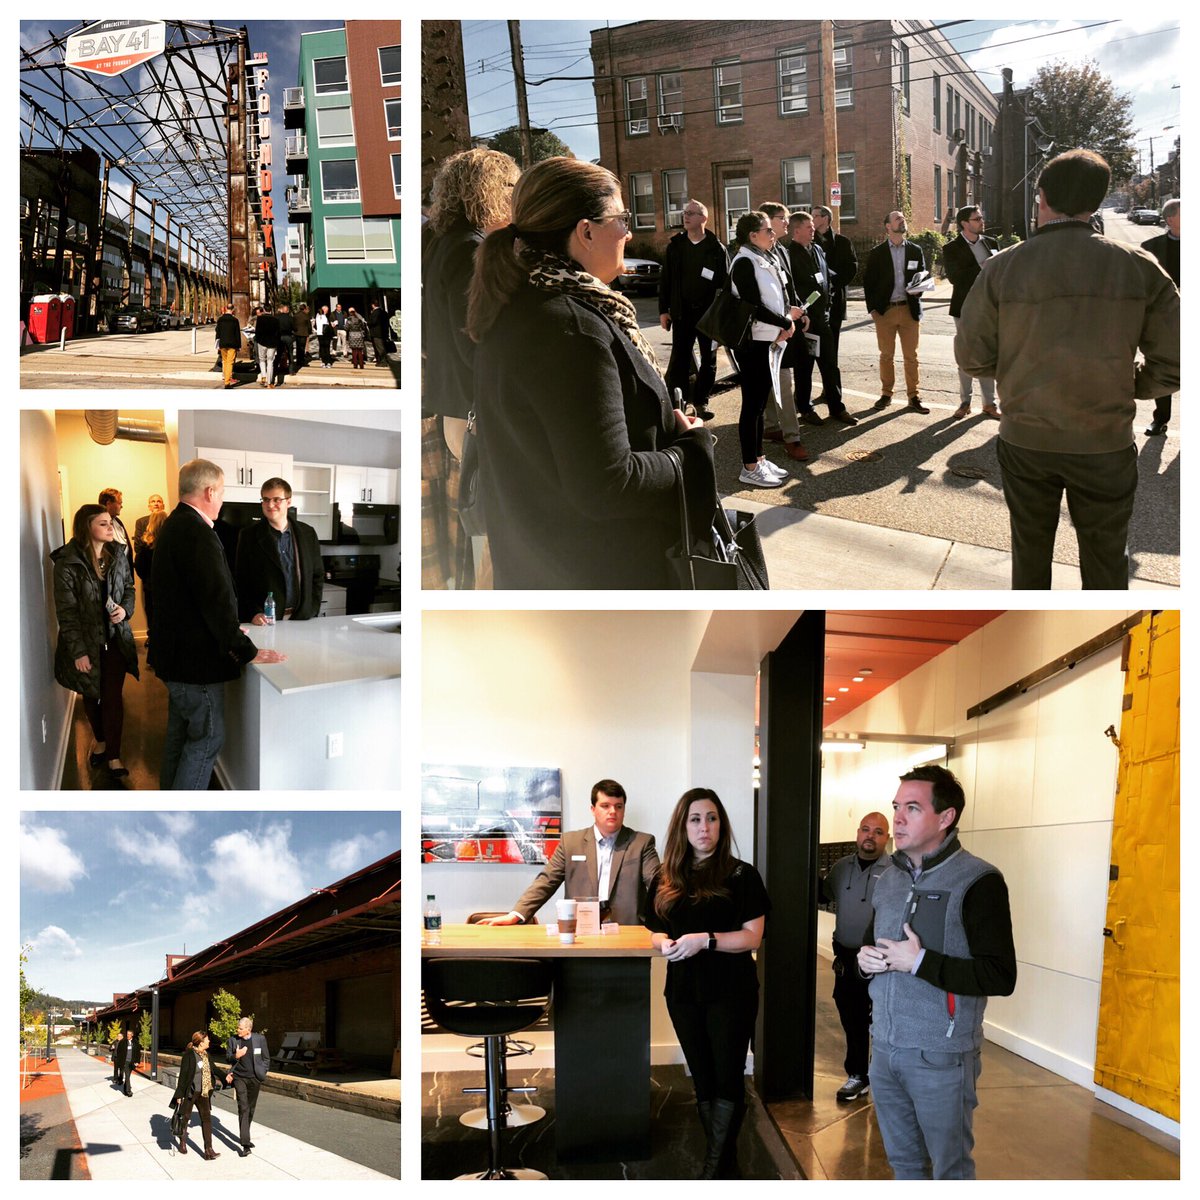 Busy day in Pittsburgh at the 2nd day of the Regional Product Council. #pittsburgh #cleveland #uli @urbanlandinstitute #productcouncil #midwest #development #ulicleveland